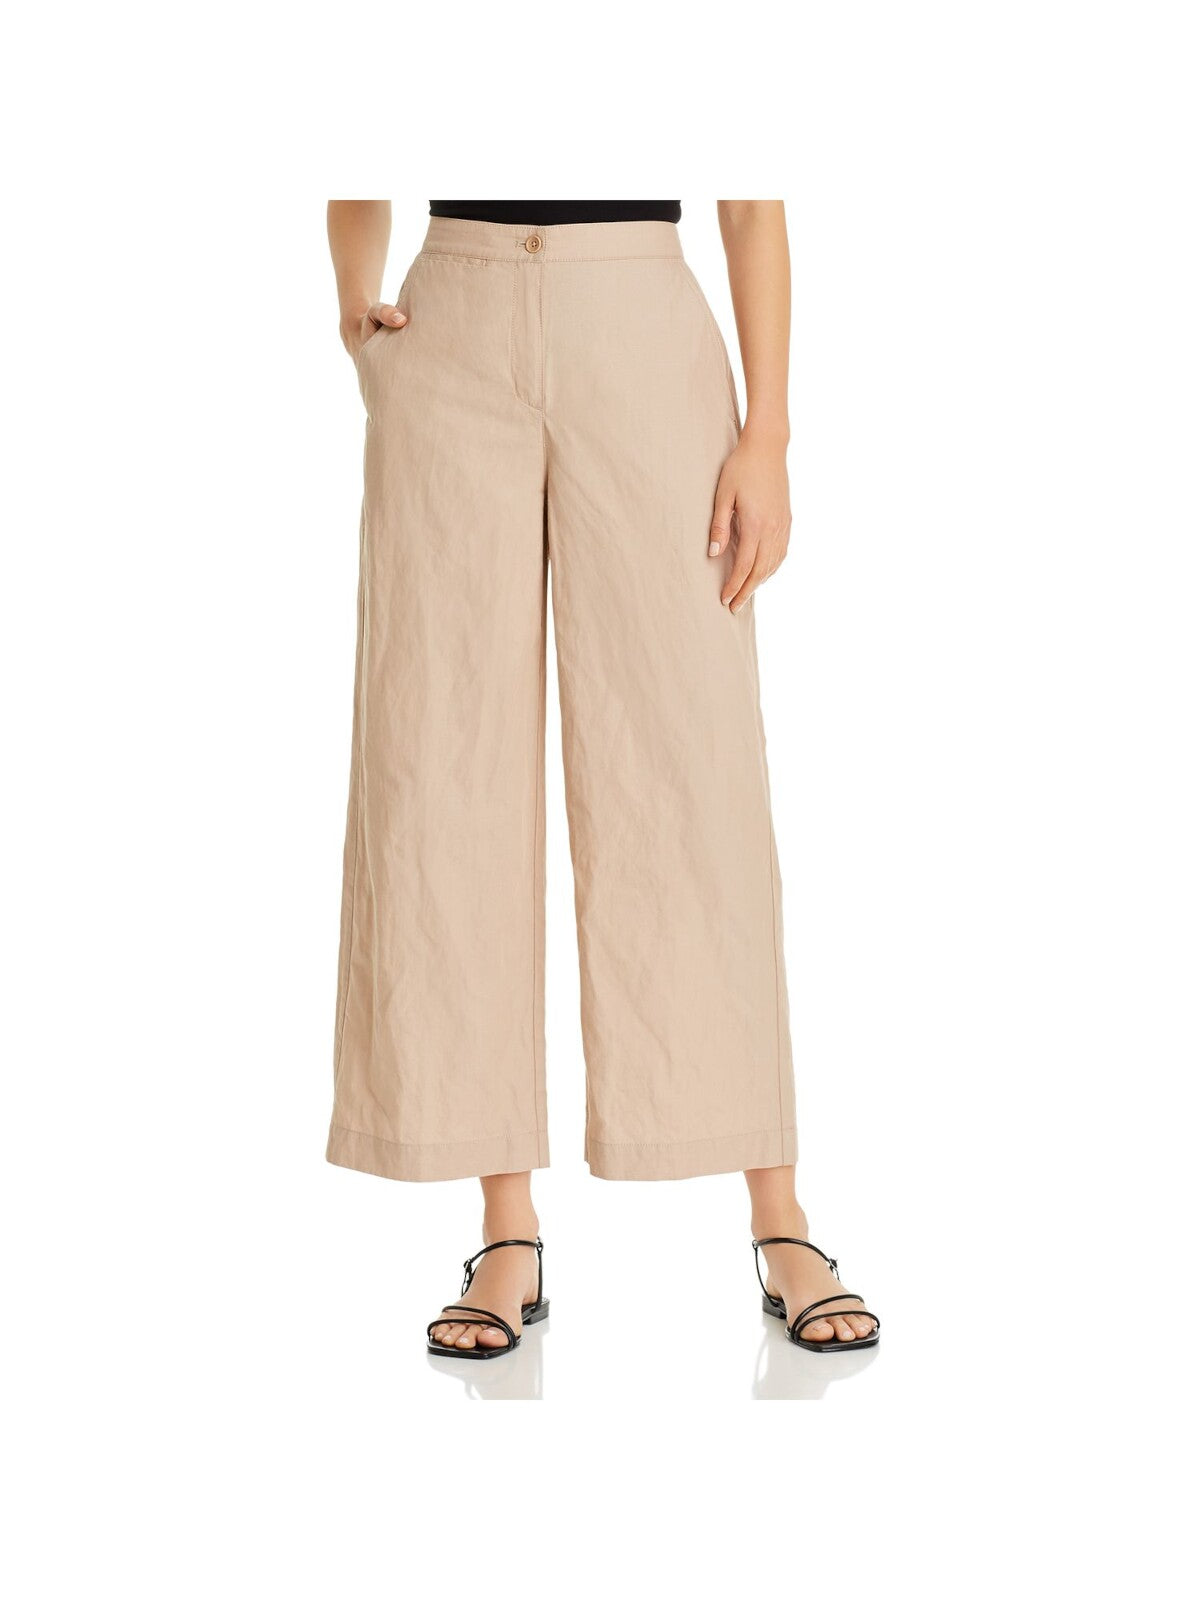 EILEEN FISHER Womens Beige Pocketed Zippered Ankle Wide Leg Pants 4